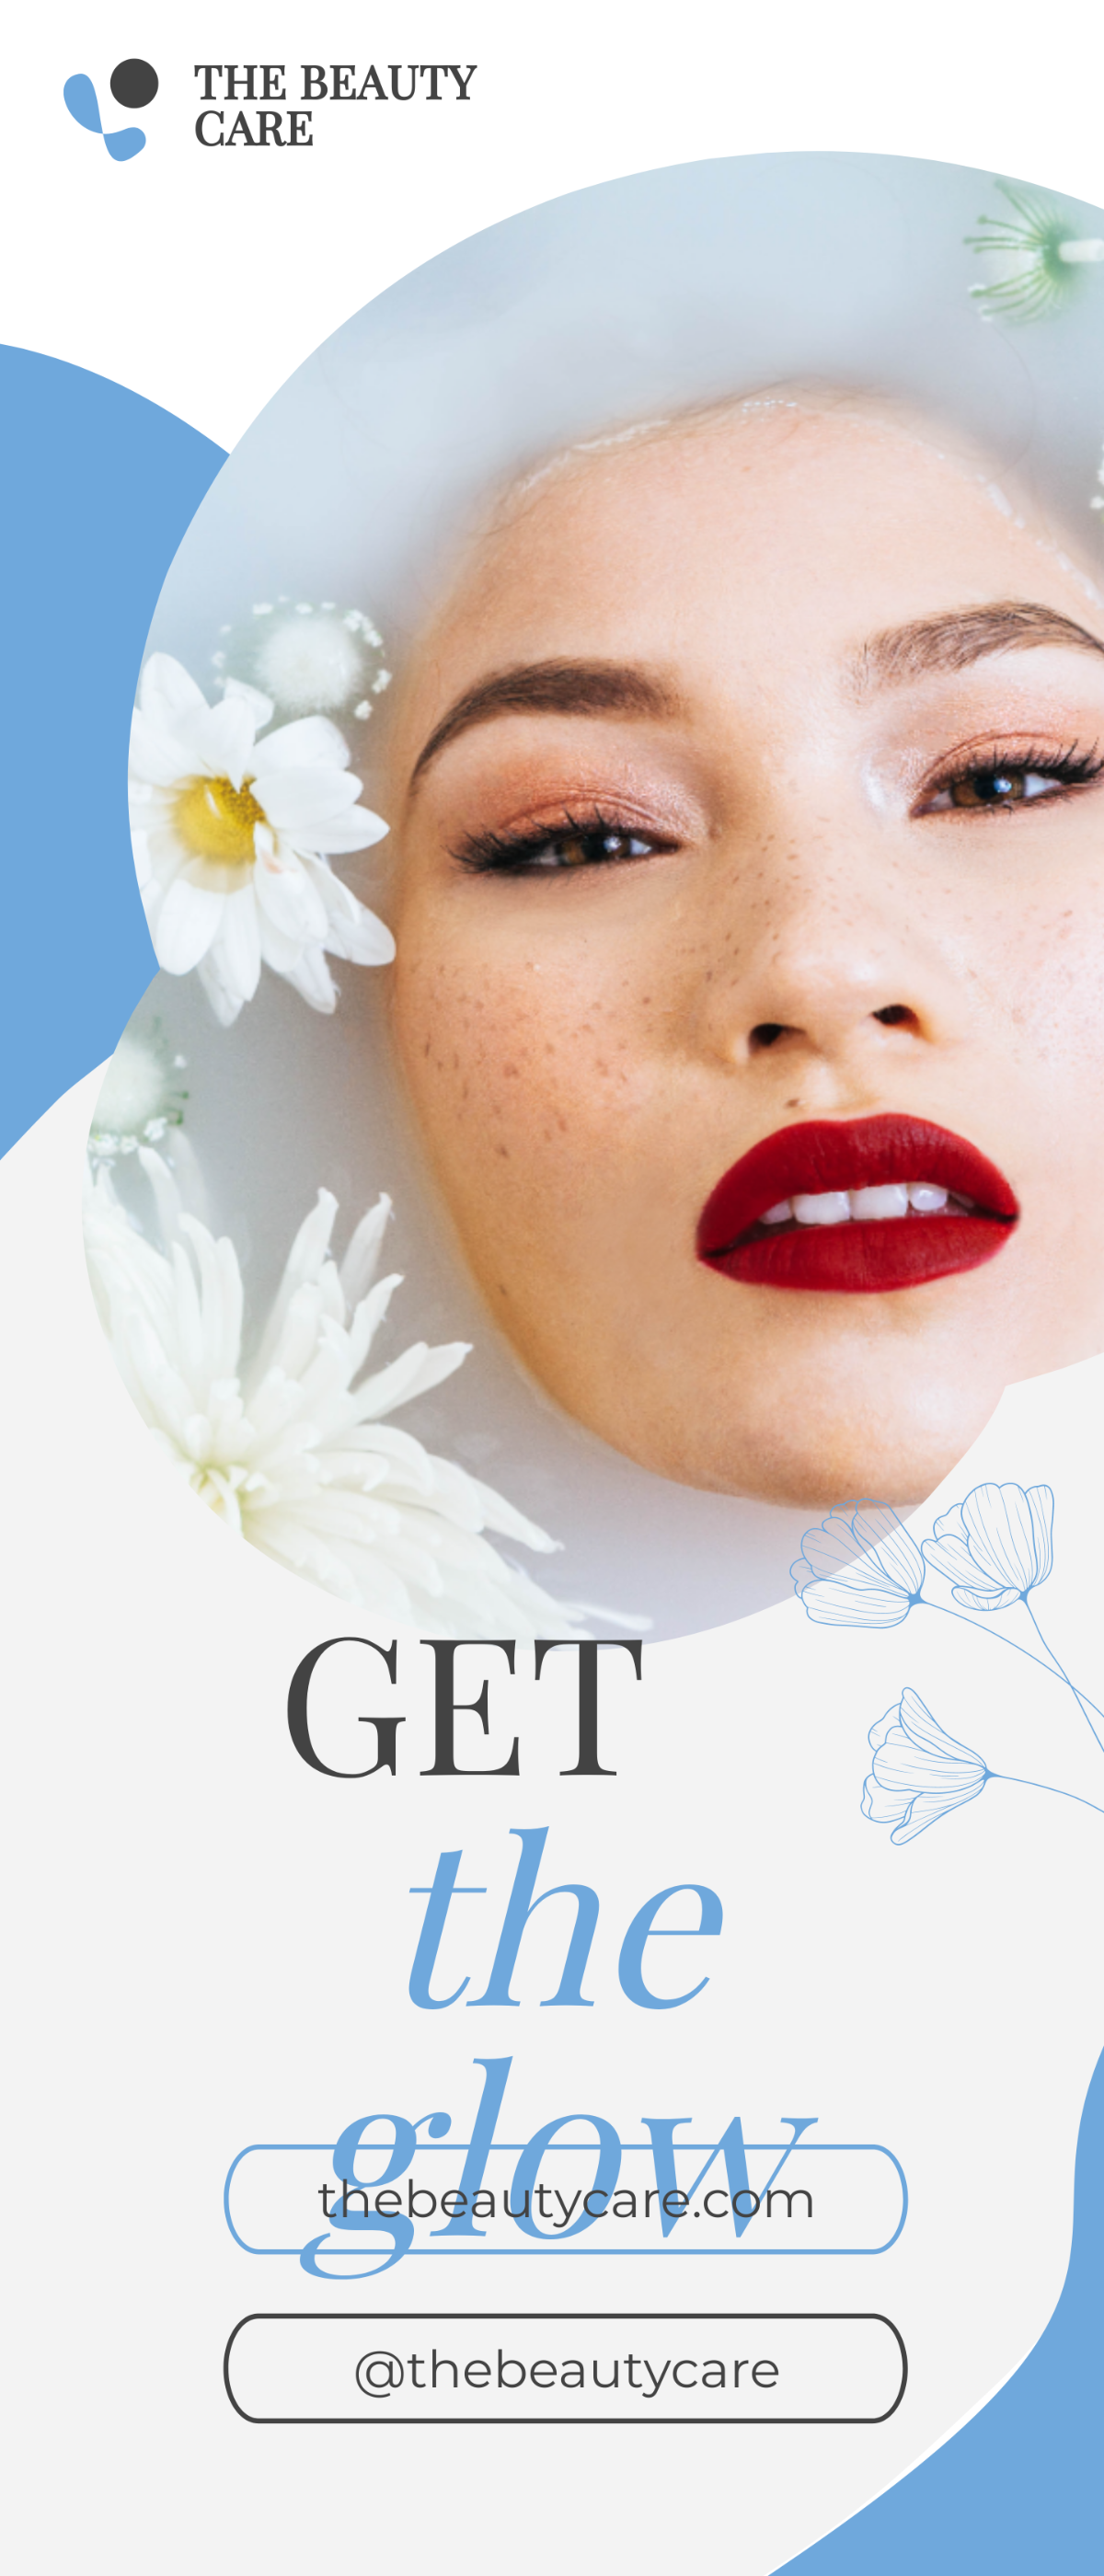 Skin Care Roll Up Banner